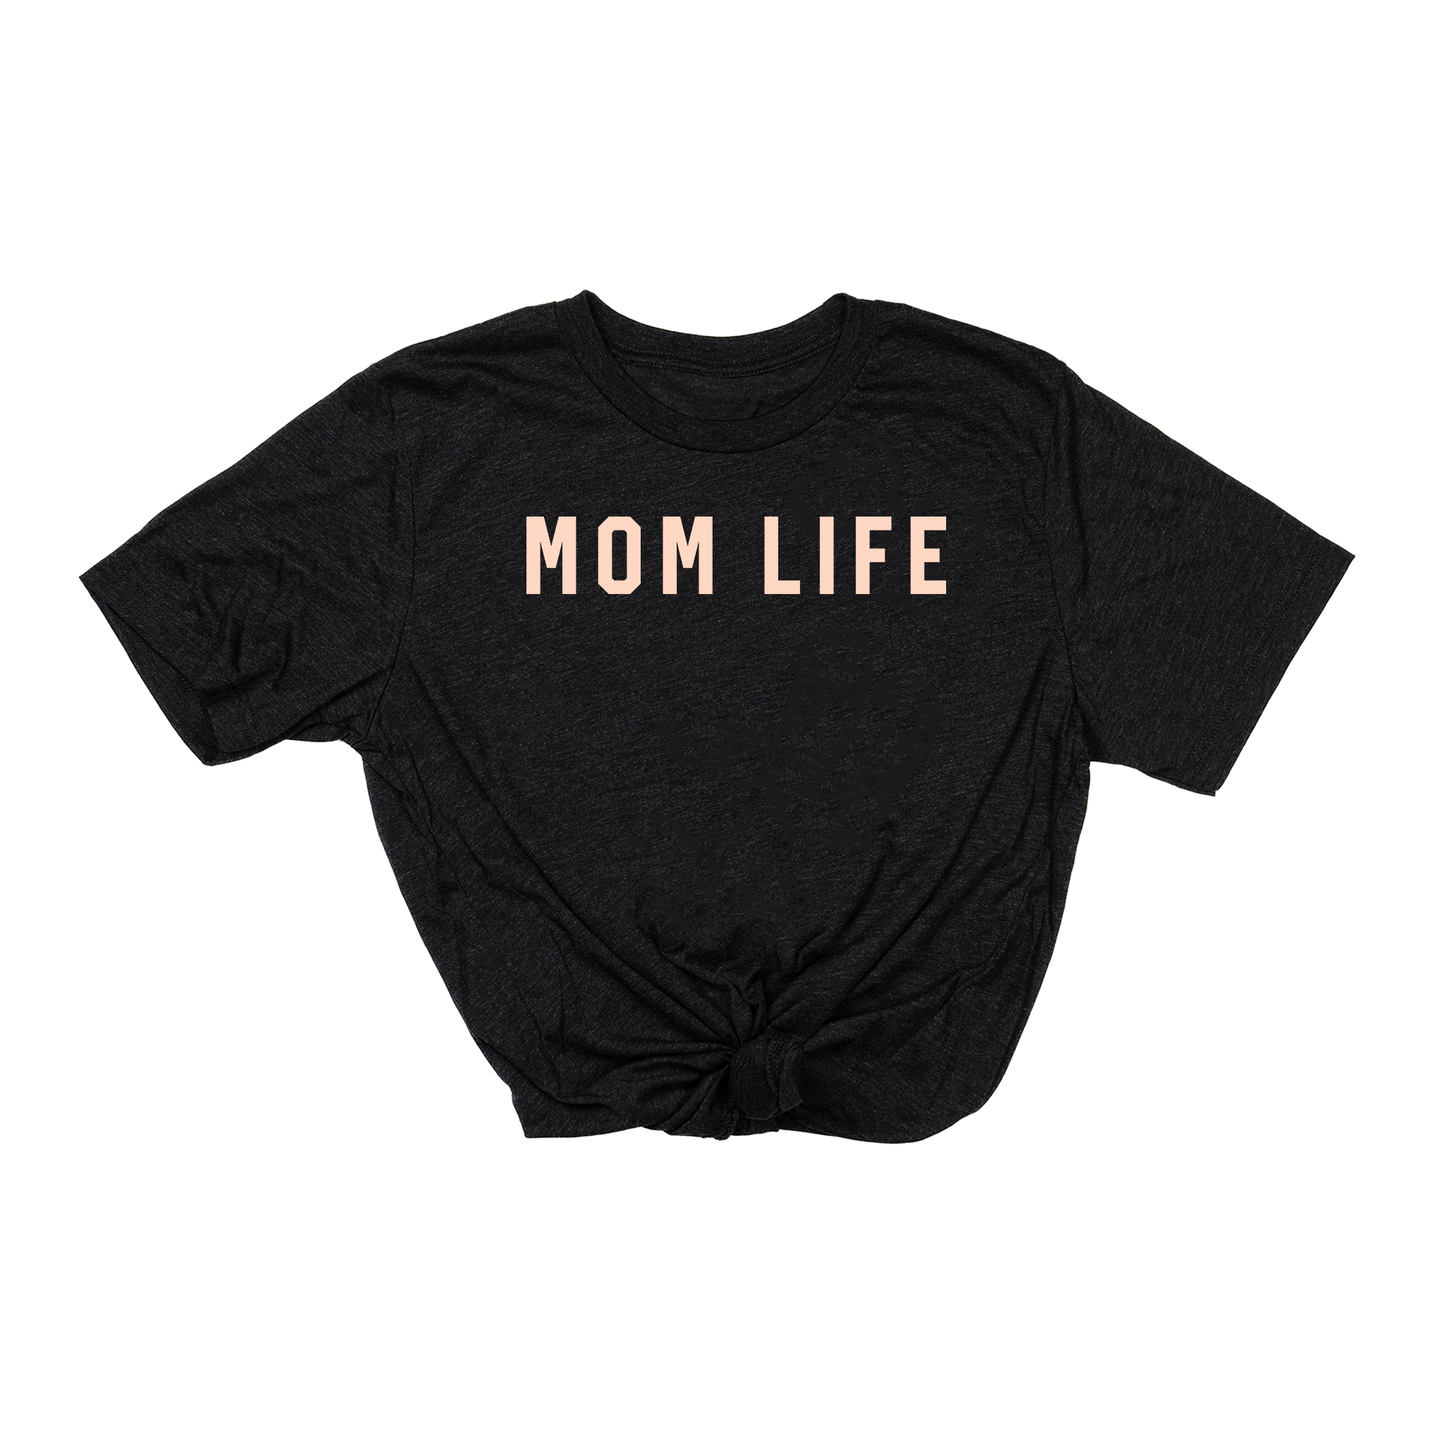 Mom Life (Across Front, Peach) - Tee (Charcoal Black)